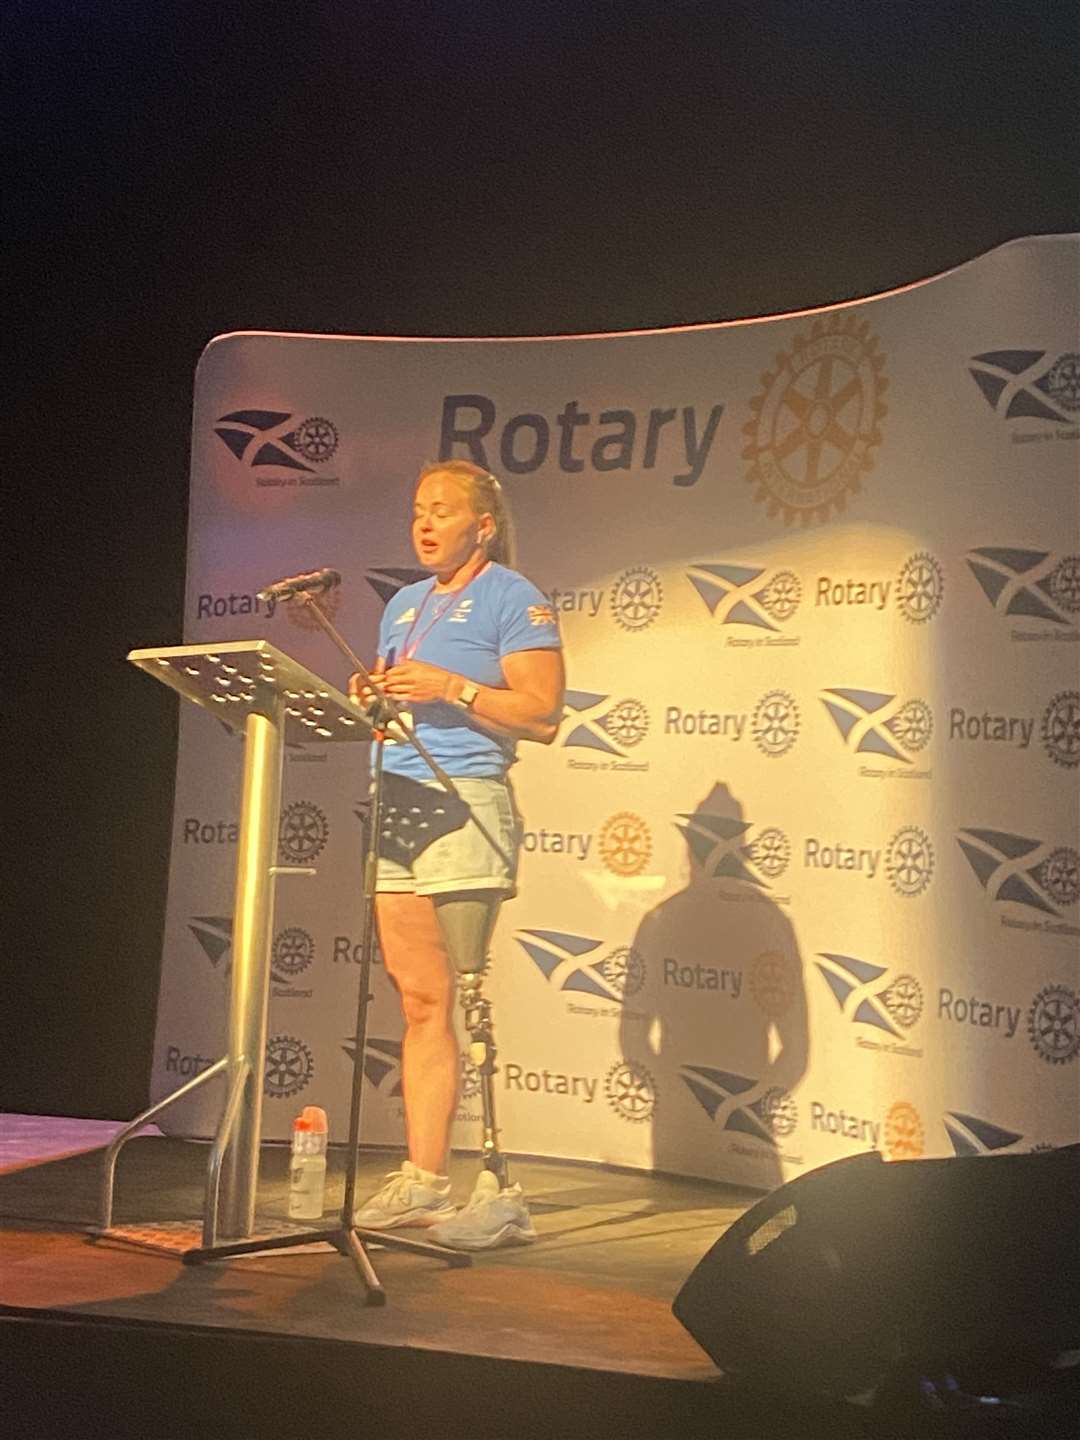 Hope Gordon speaking at the Rotary conference.